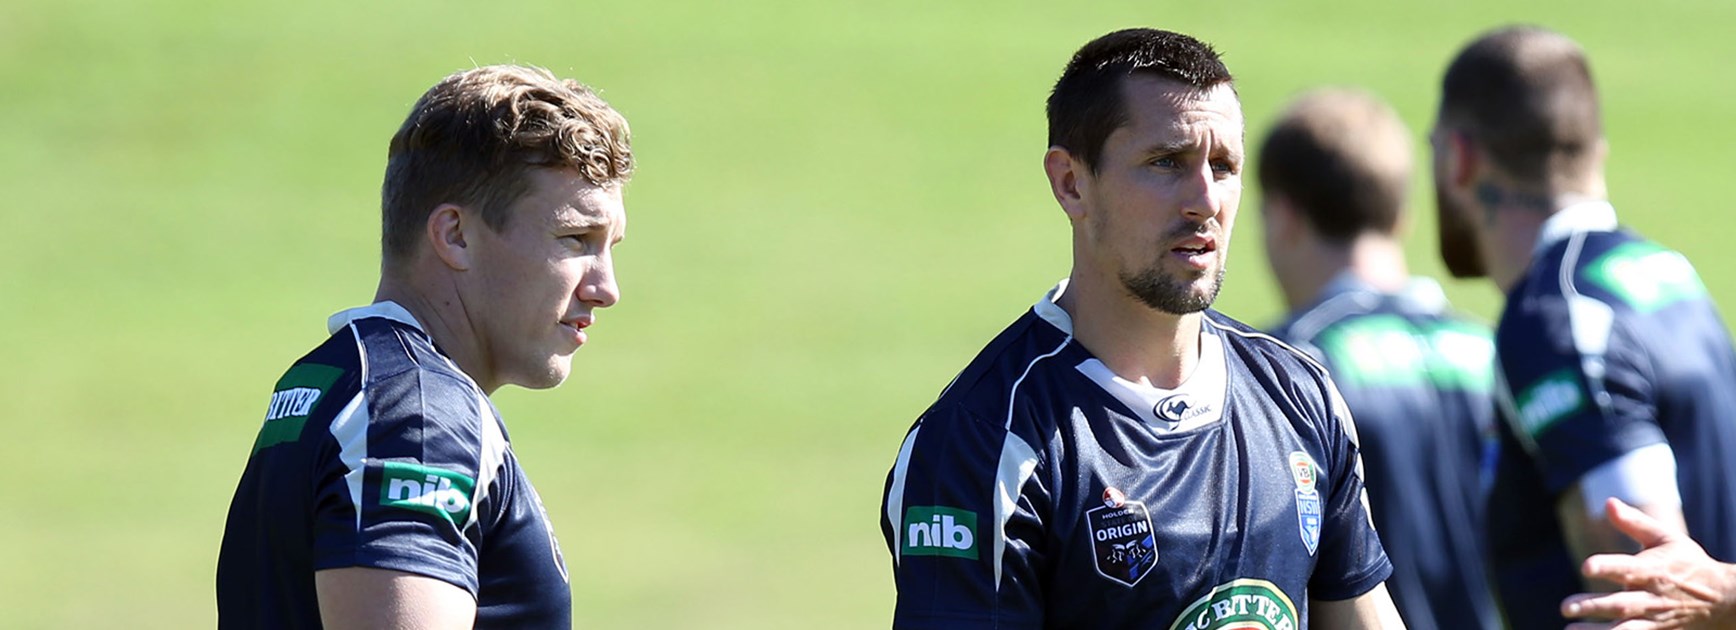 NSW Blues halves Trent Hodkinson and Mitchell Pearce plan their attack ahead of Holden State of Origin I.